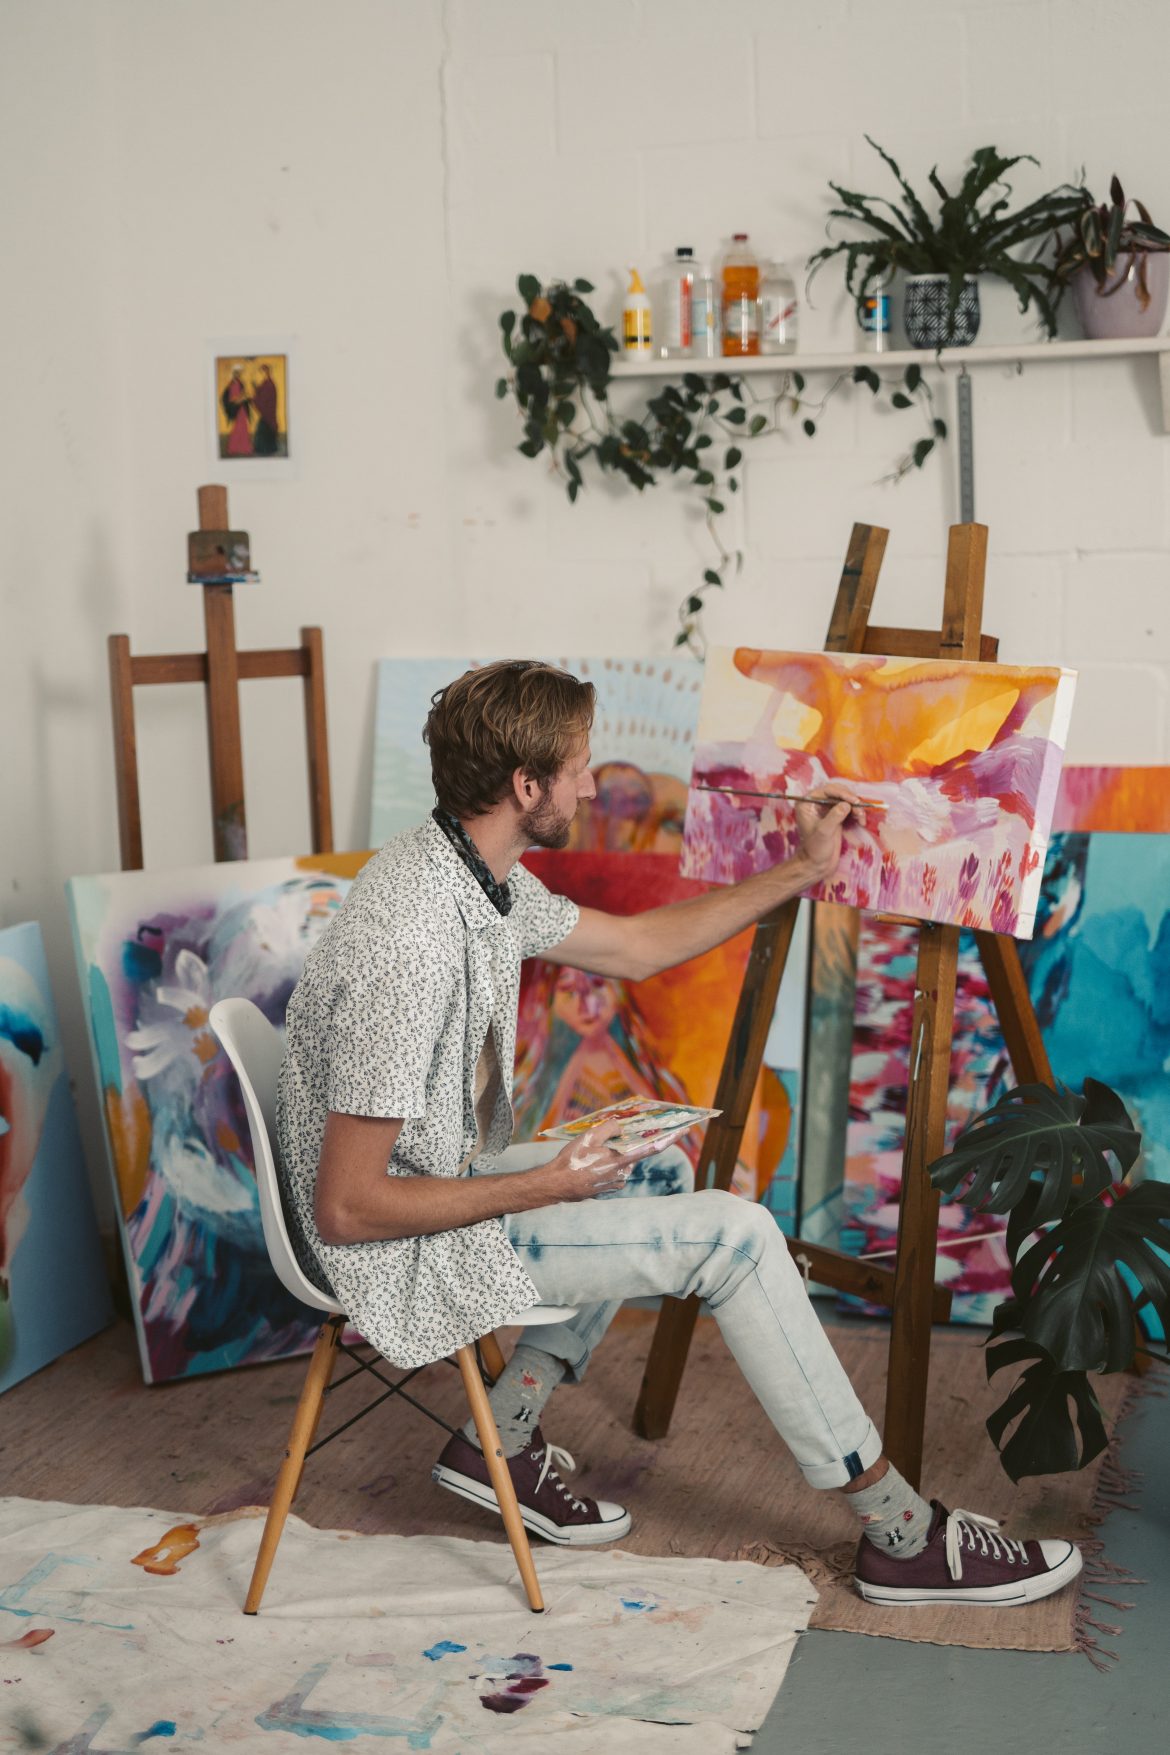 How to Create an Art Studio Space at home - Art Business News